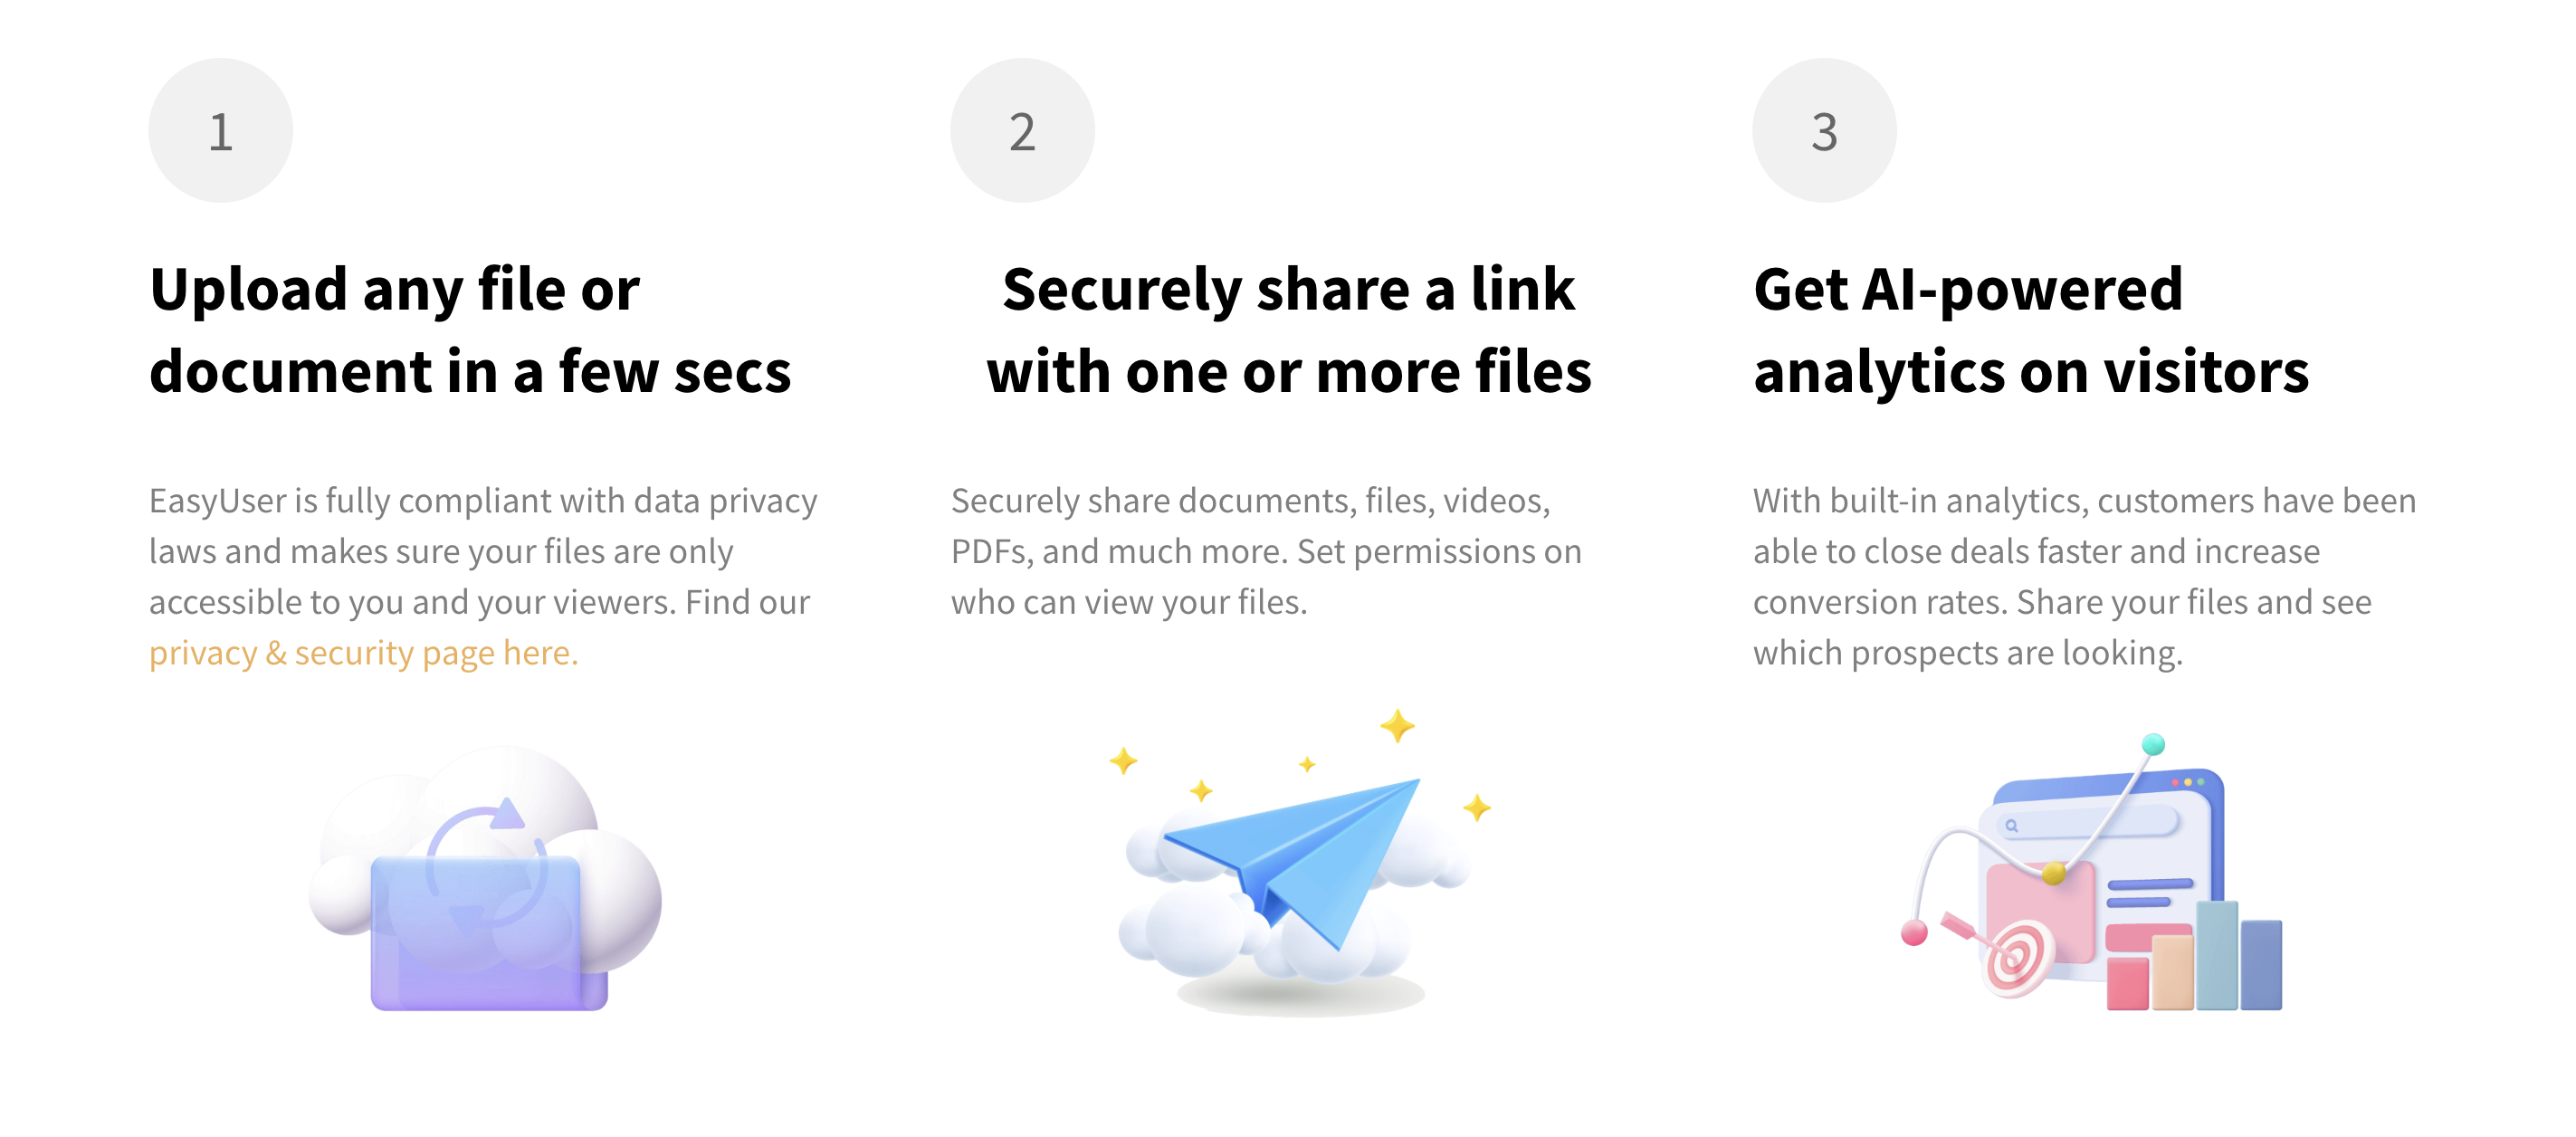 Follow Our Popular 3-Step Process To Send Any File. Share Your First File In Less Than a Minute!